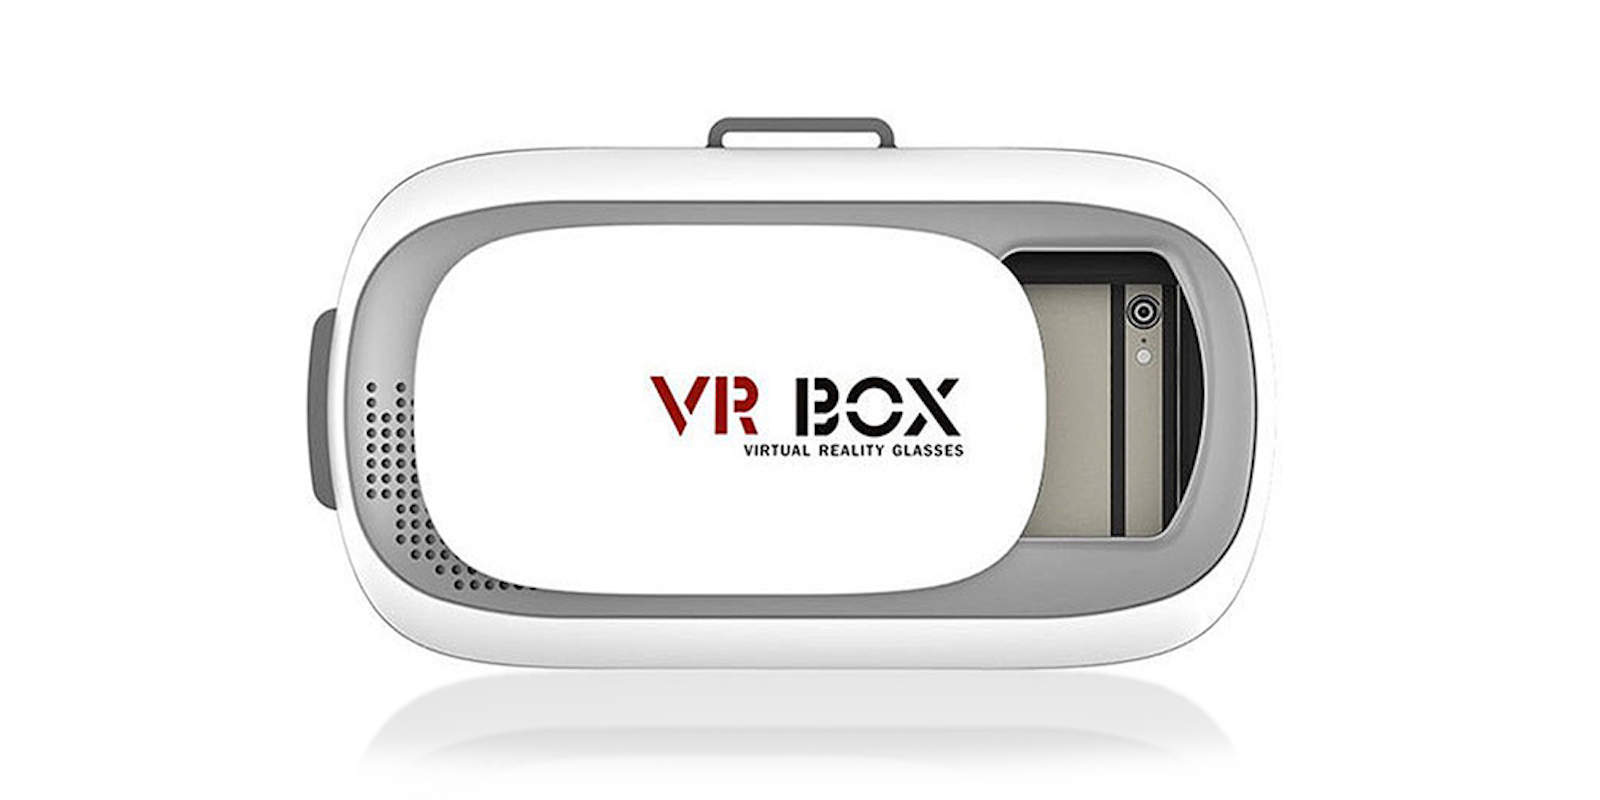 This sleek box turns your smartphone into a full-fledged VR headset.